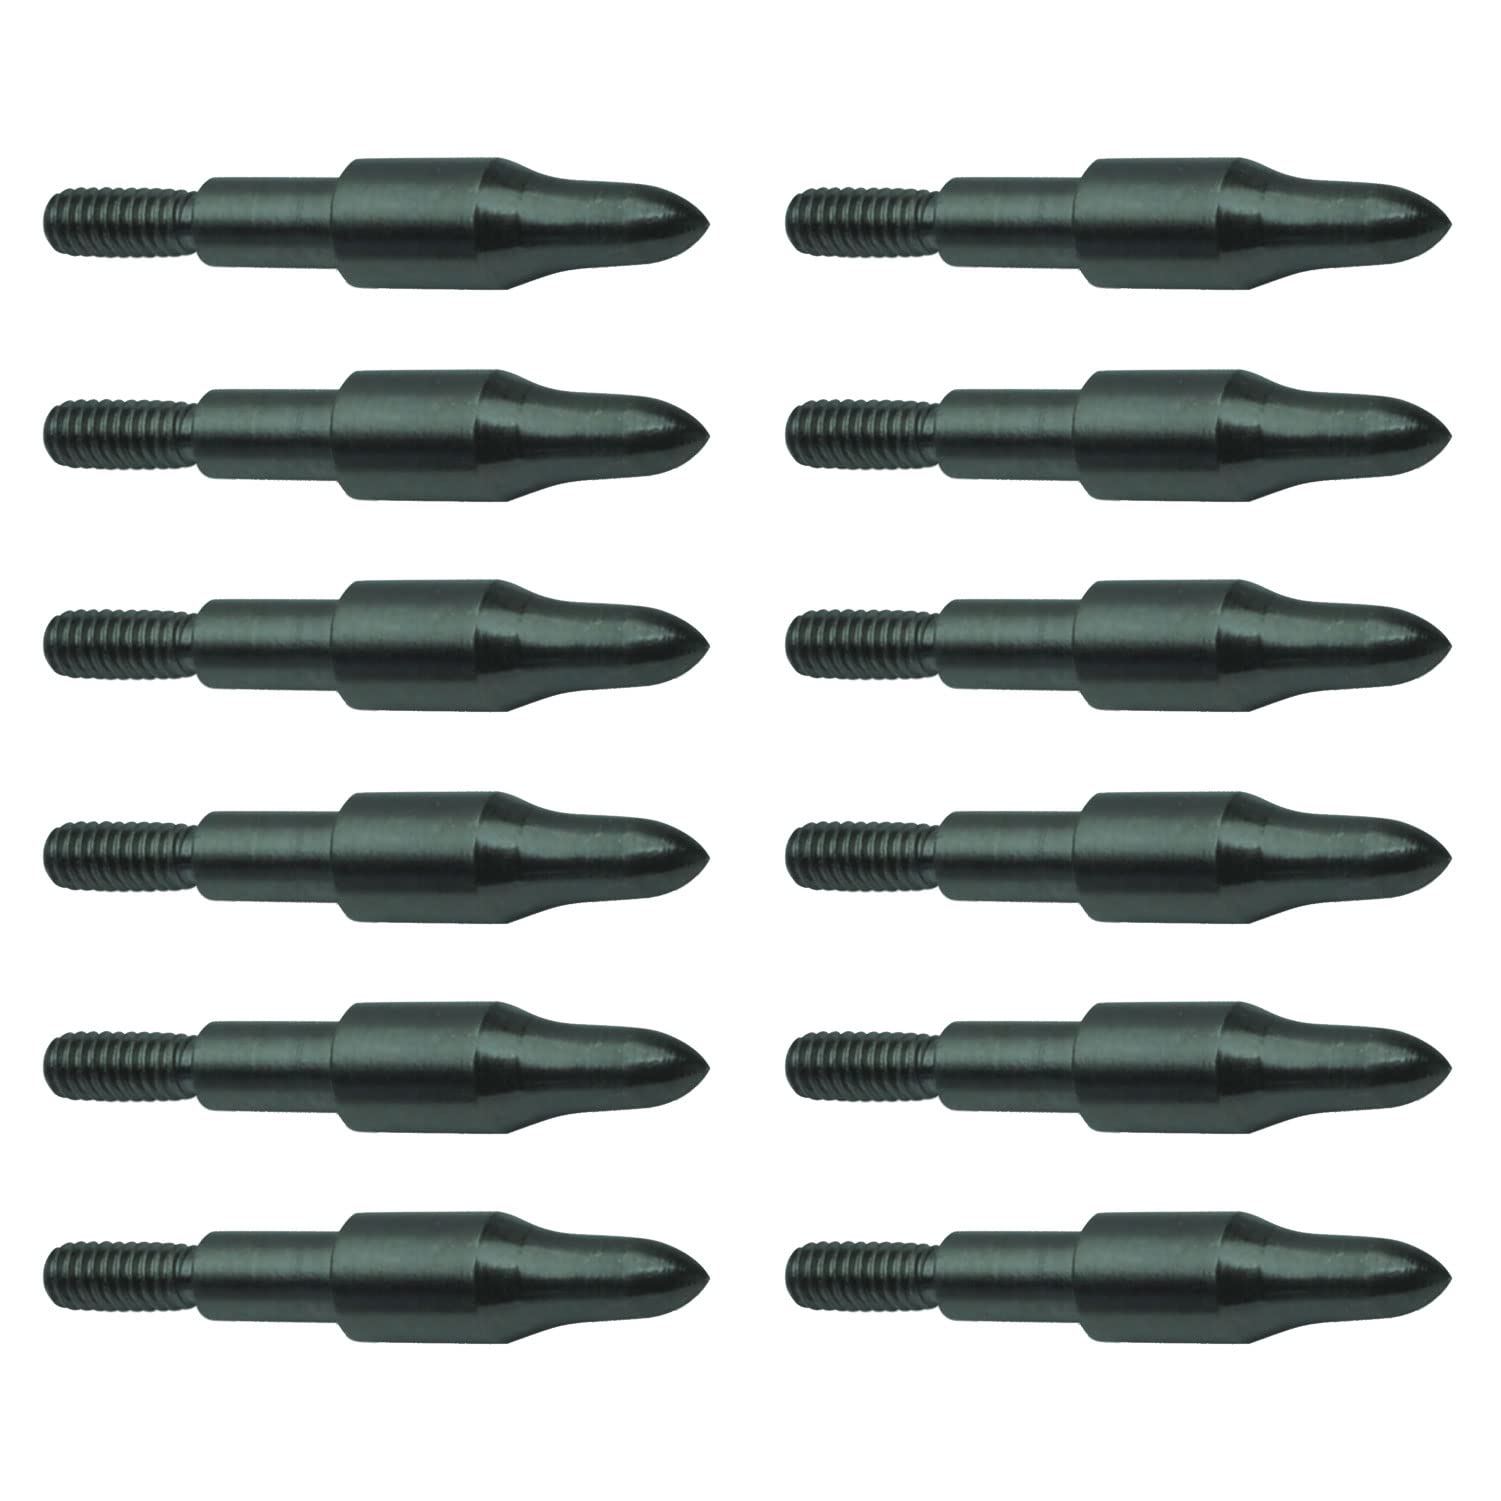 12-Pack New Archery Products 3D Point Durable Steel Screw-in Archery Practice Field Tips 125 Grain, 9/32" $2.00 + Free Shipping w/ Prime or on $35+